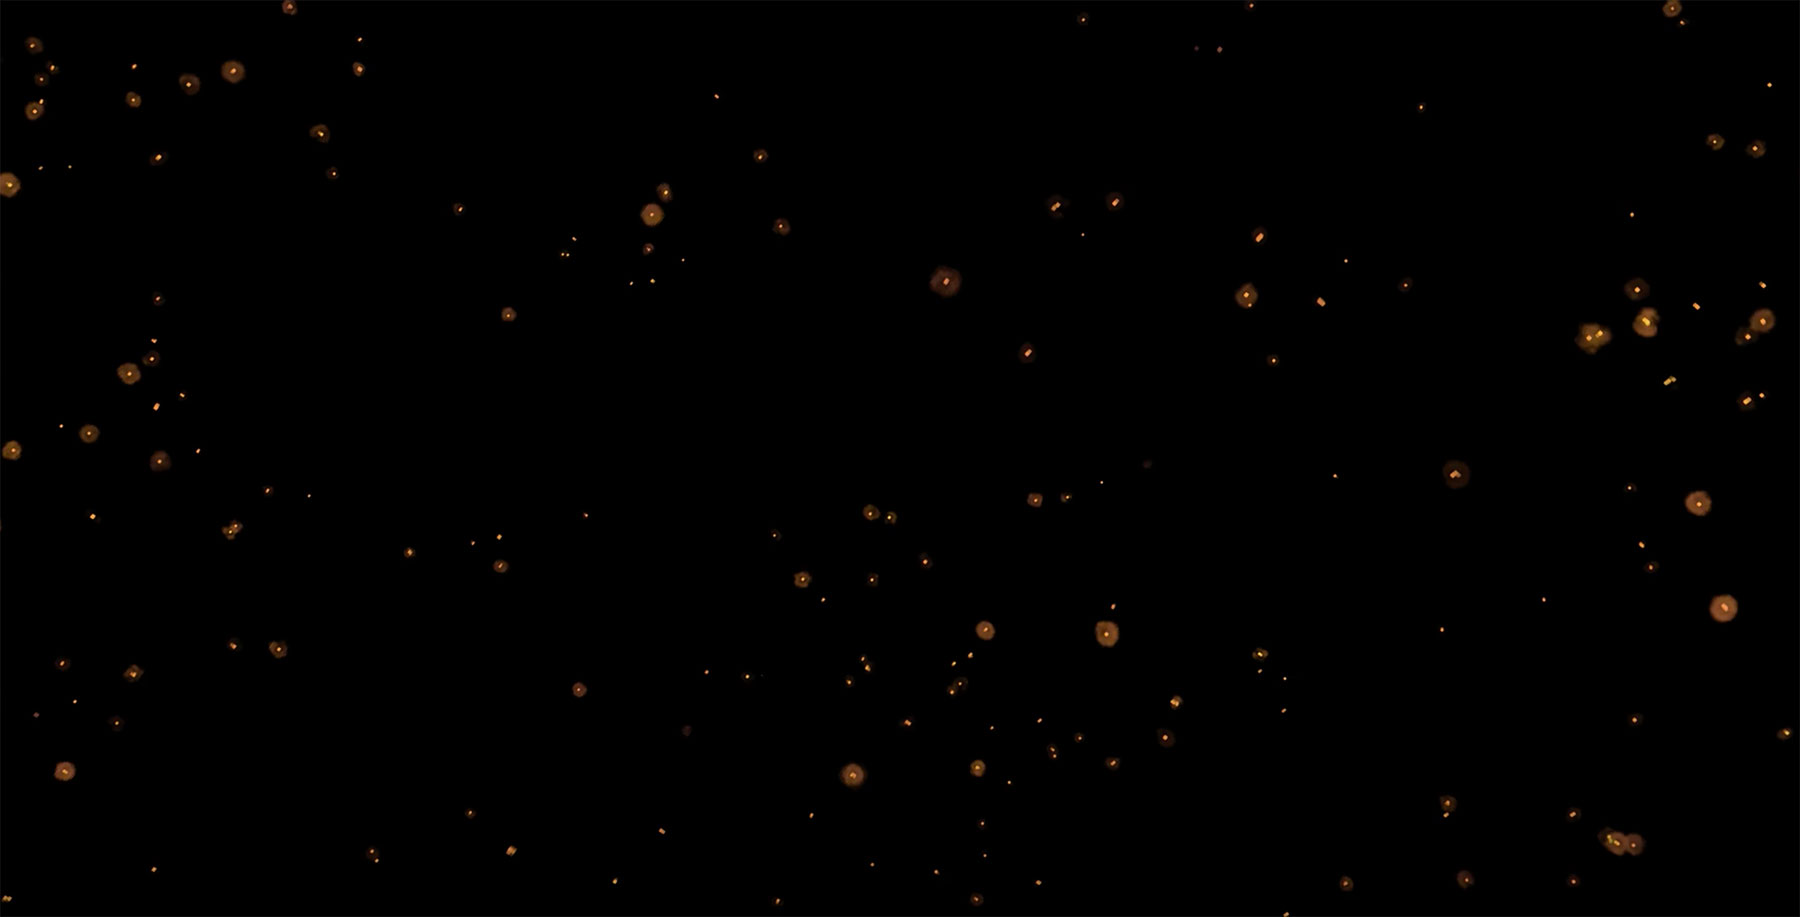 Still image from a Thesan simulation showing the universe 251 million years after the Big Bang. The orange halos represent the burst of radiation, or light, outpouring from early galaxies.